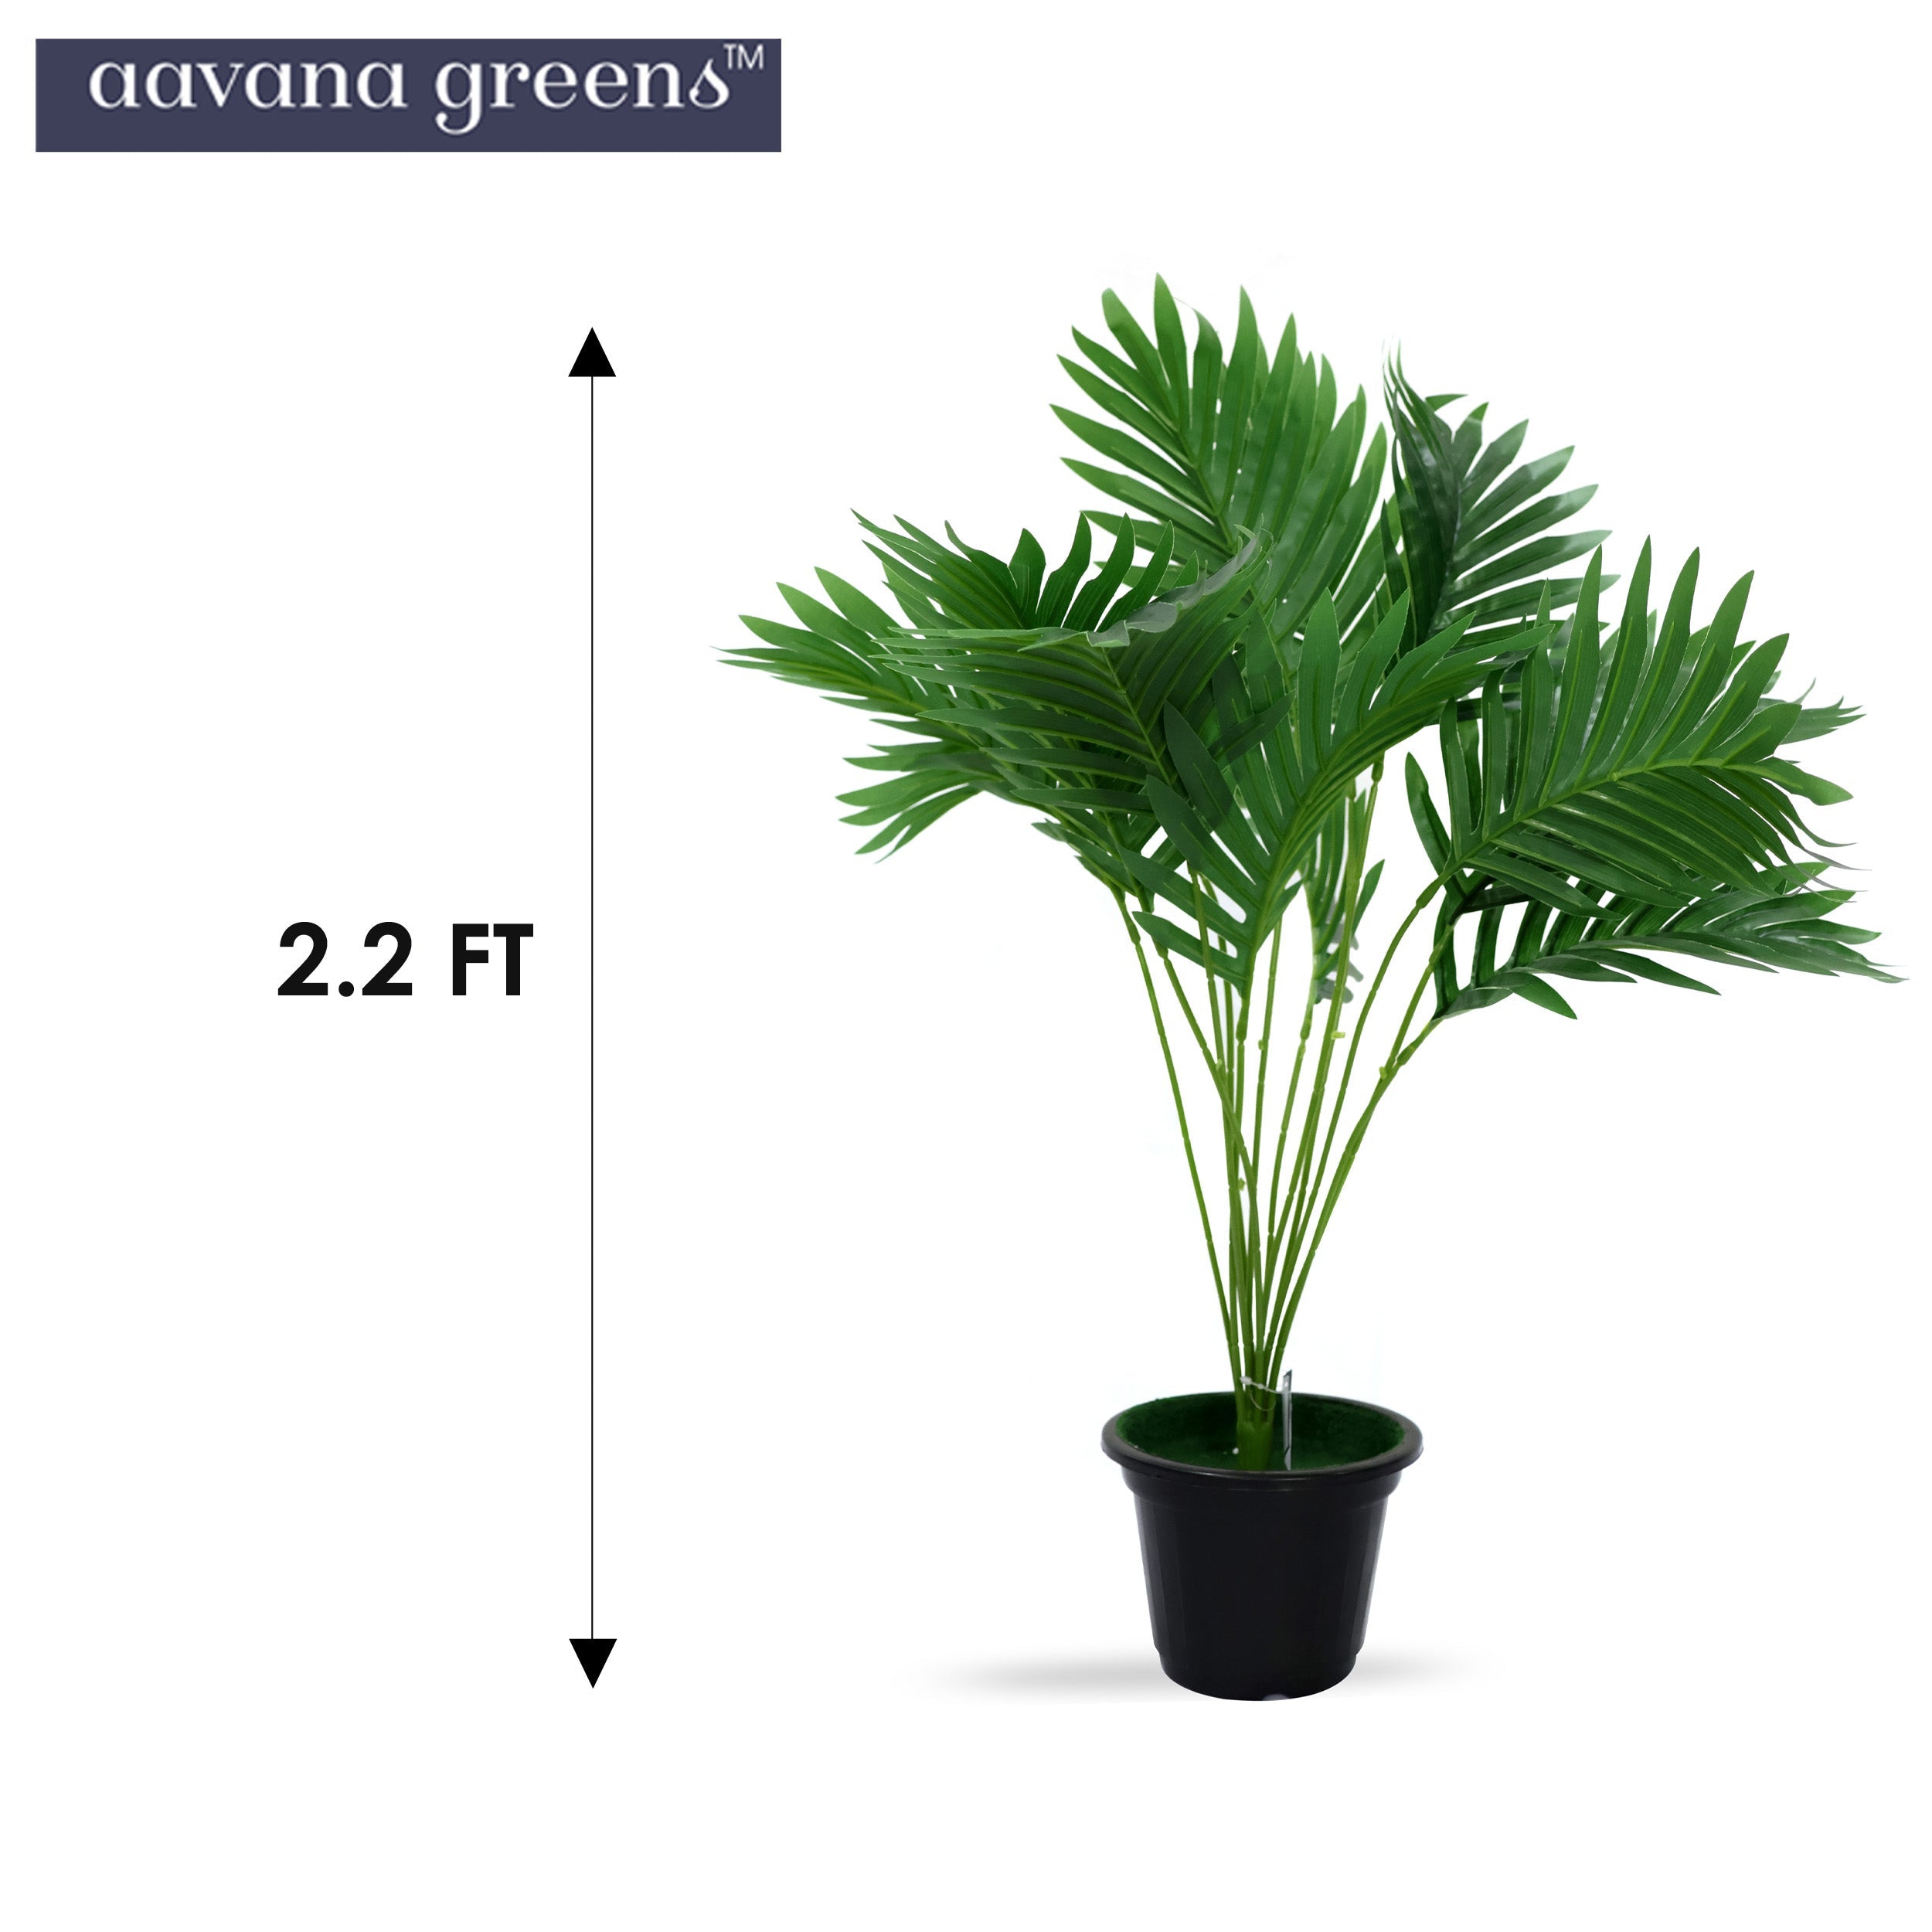 AAVANA GREENS 26" Decorative Artificial Plants in Pots Indoor and Outdoor for Home Wall Desk Bedroom Restaurant Decoration, Realistic Lush Green Leaves